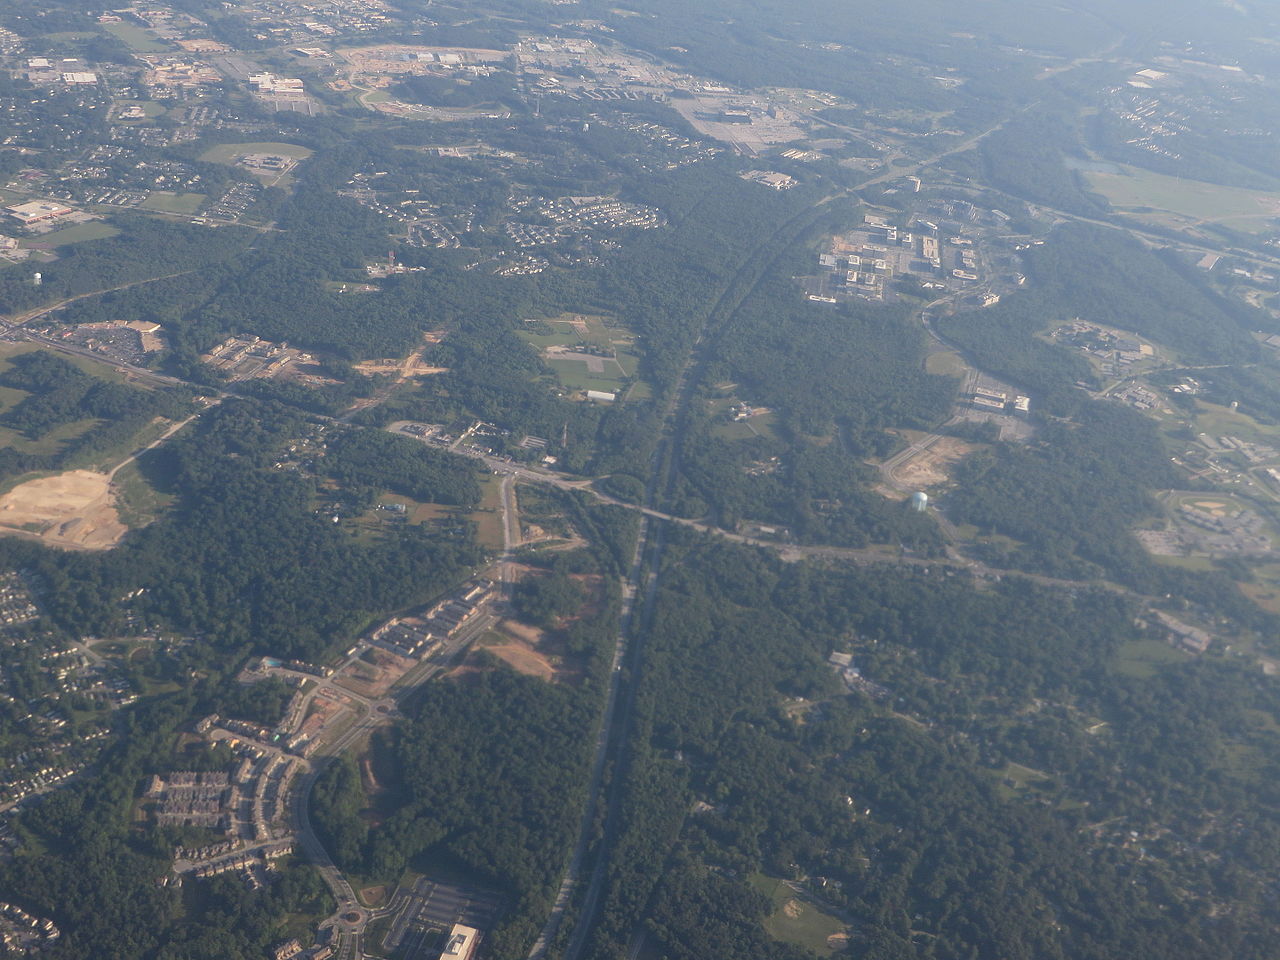 Fort Meade (and Anne Arundel County) from above.